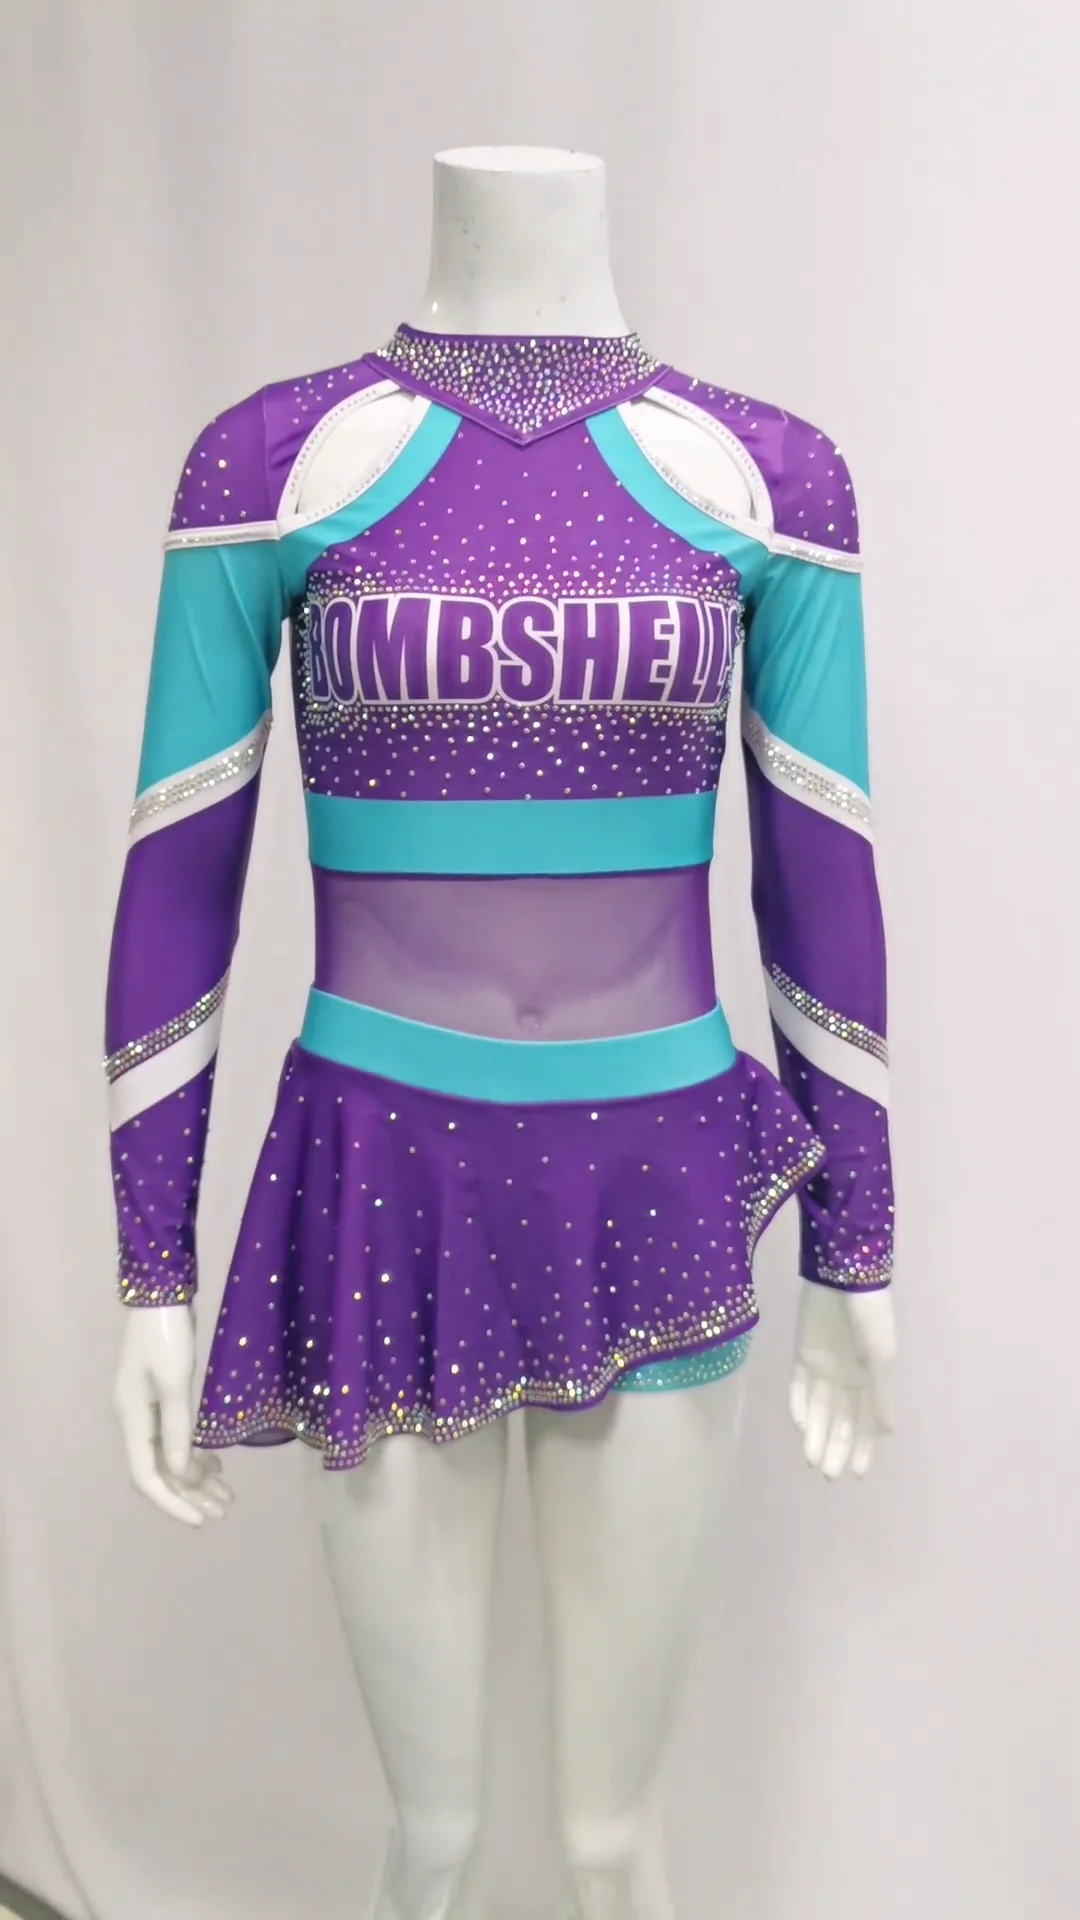 Normzl Sublimation Cheerleading Costume Free Design Your Own Cheer Practice Wear Customized 